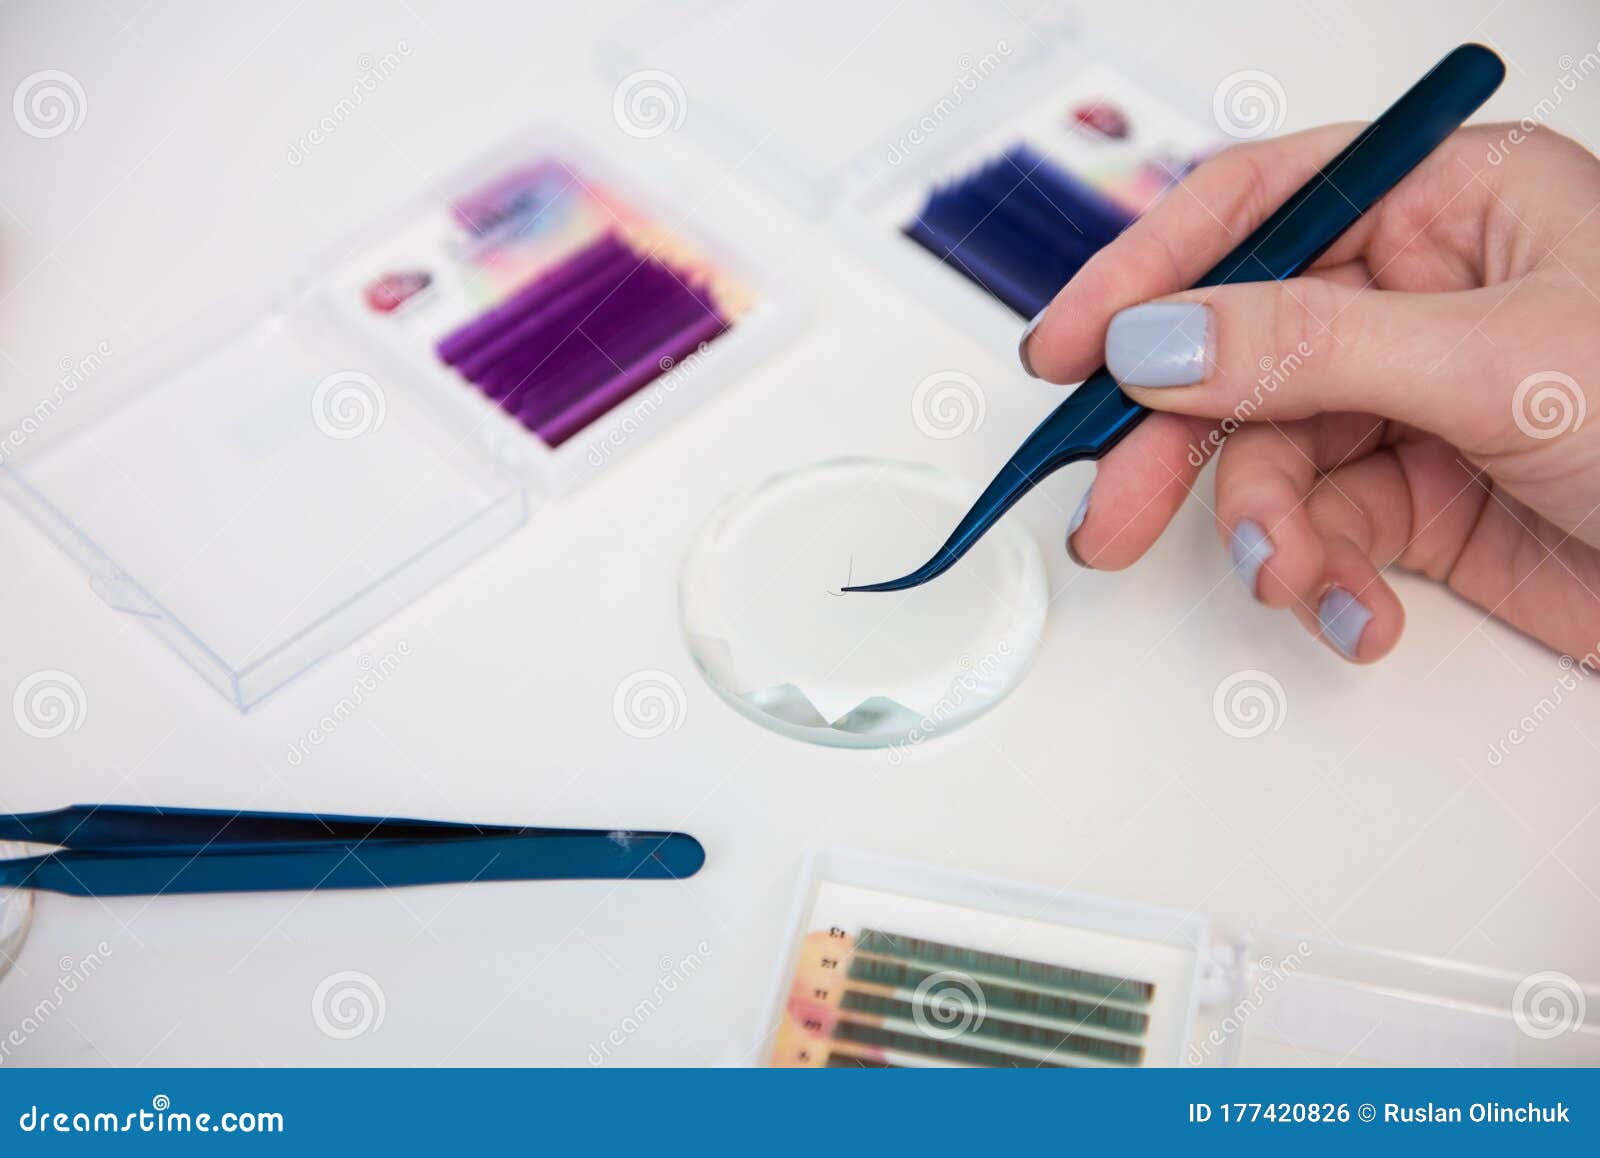 Tools for Eyelash Extension Procedure. Stock Photo - Image of adult ...